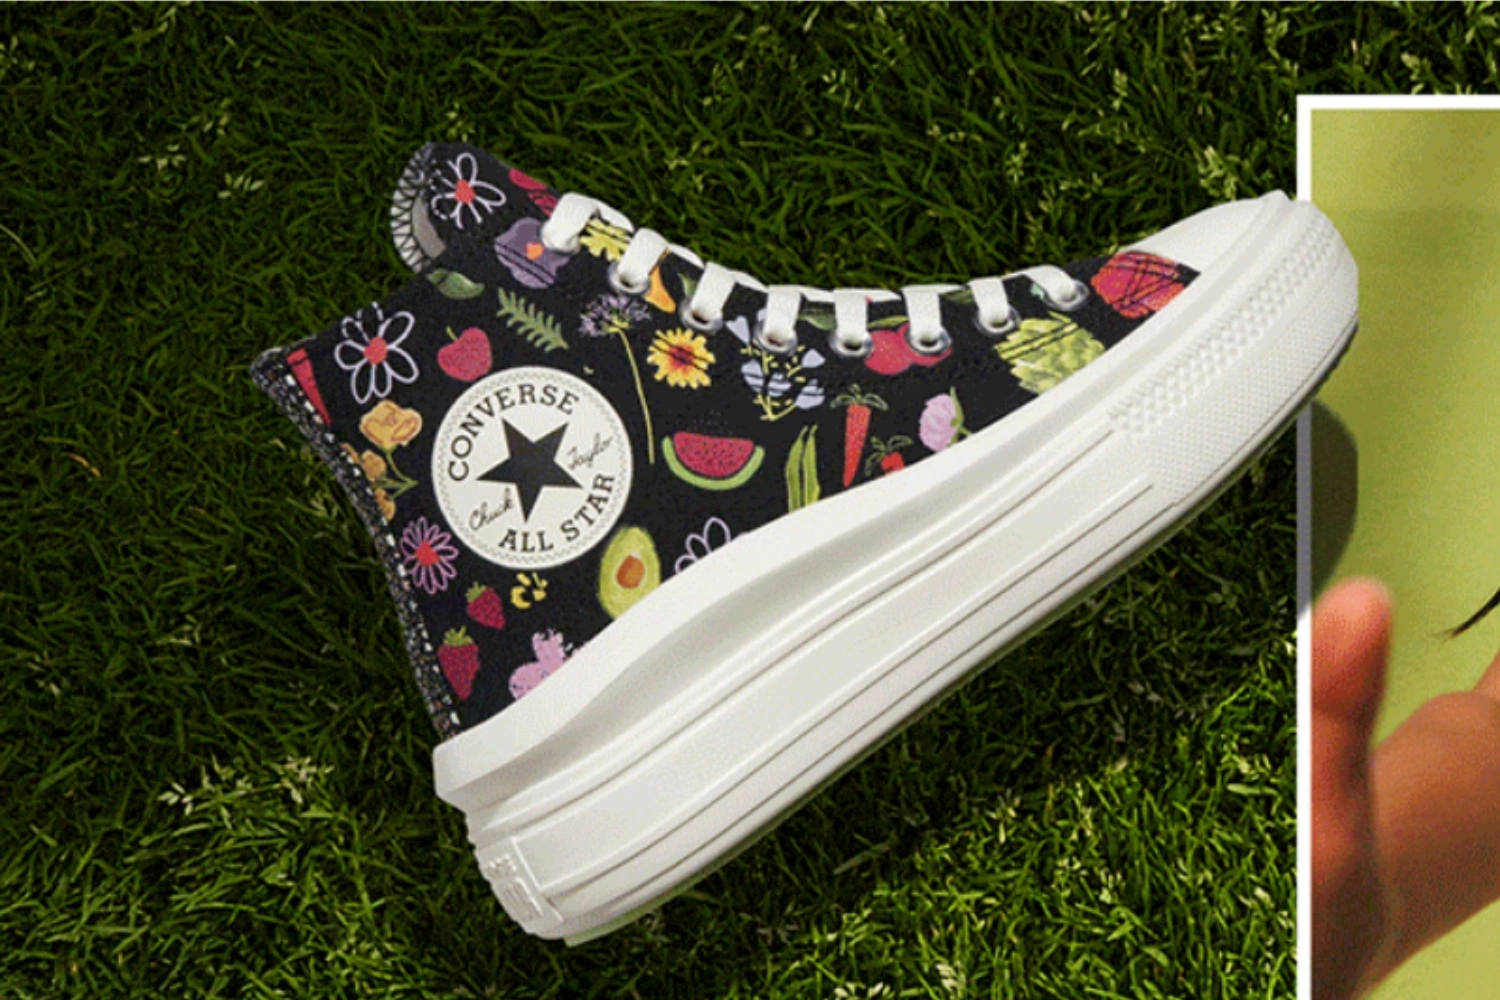 Get ready for Festival season with some Converse pieces